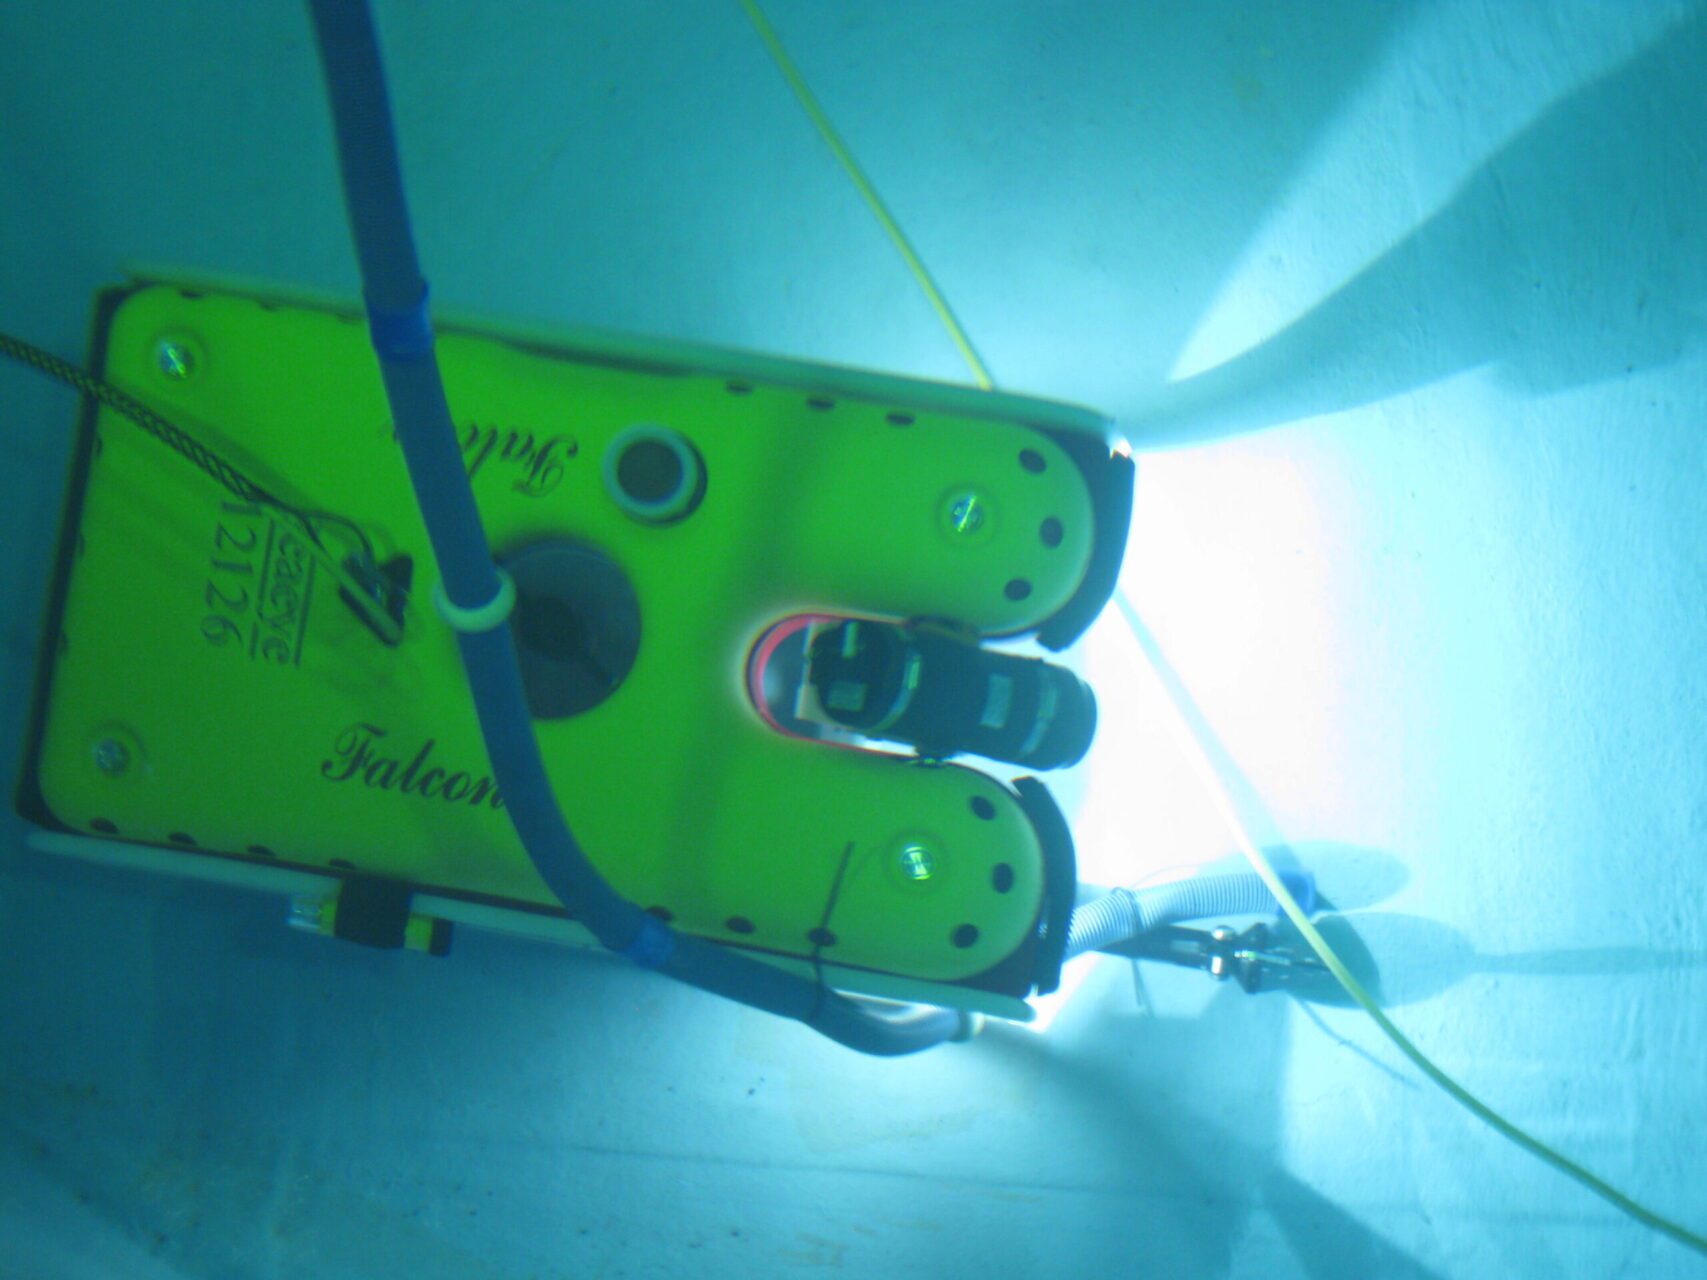 Seaeye ROVs are the trusted name in all-electric ROVs